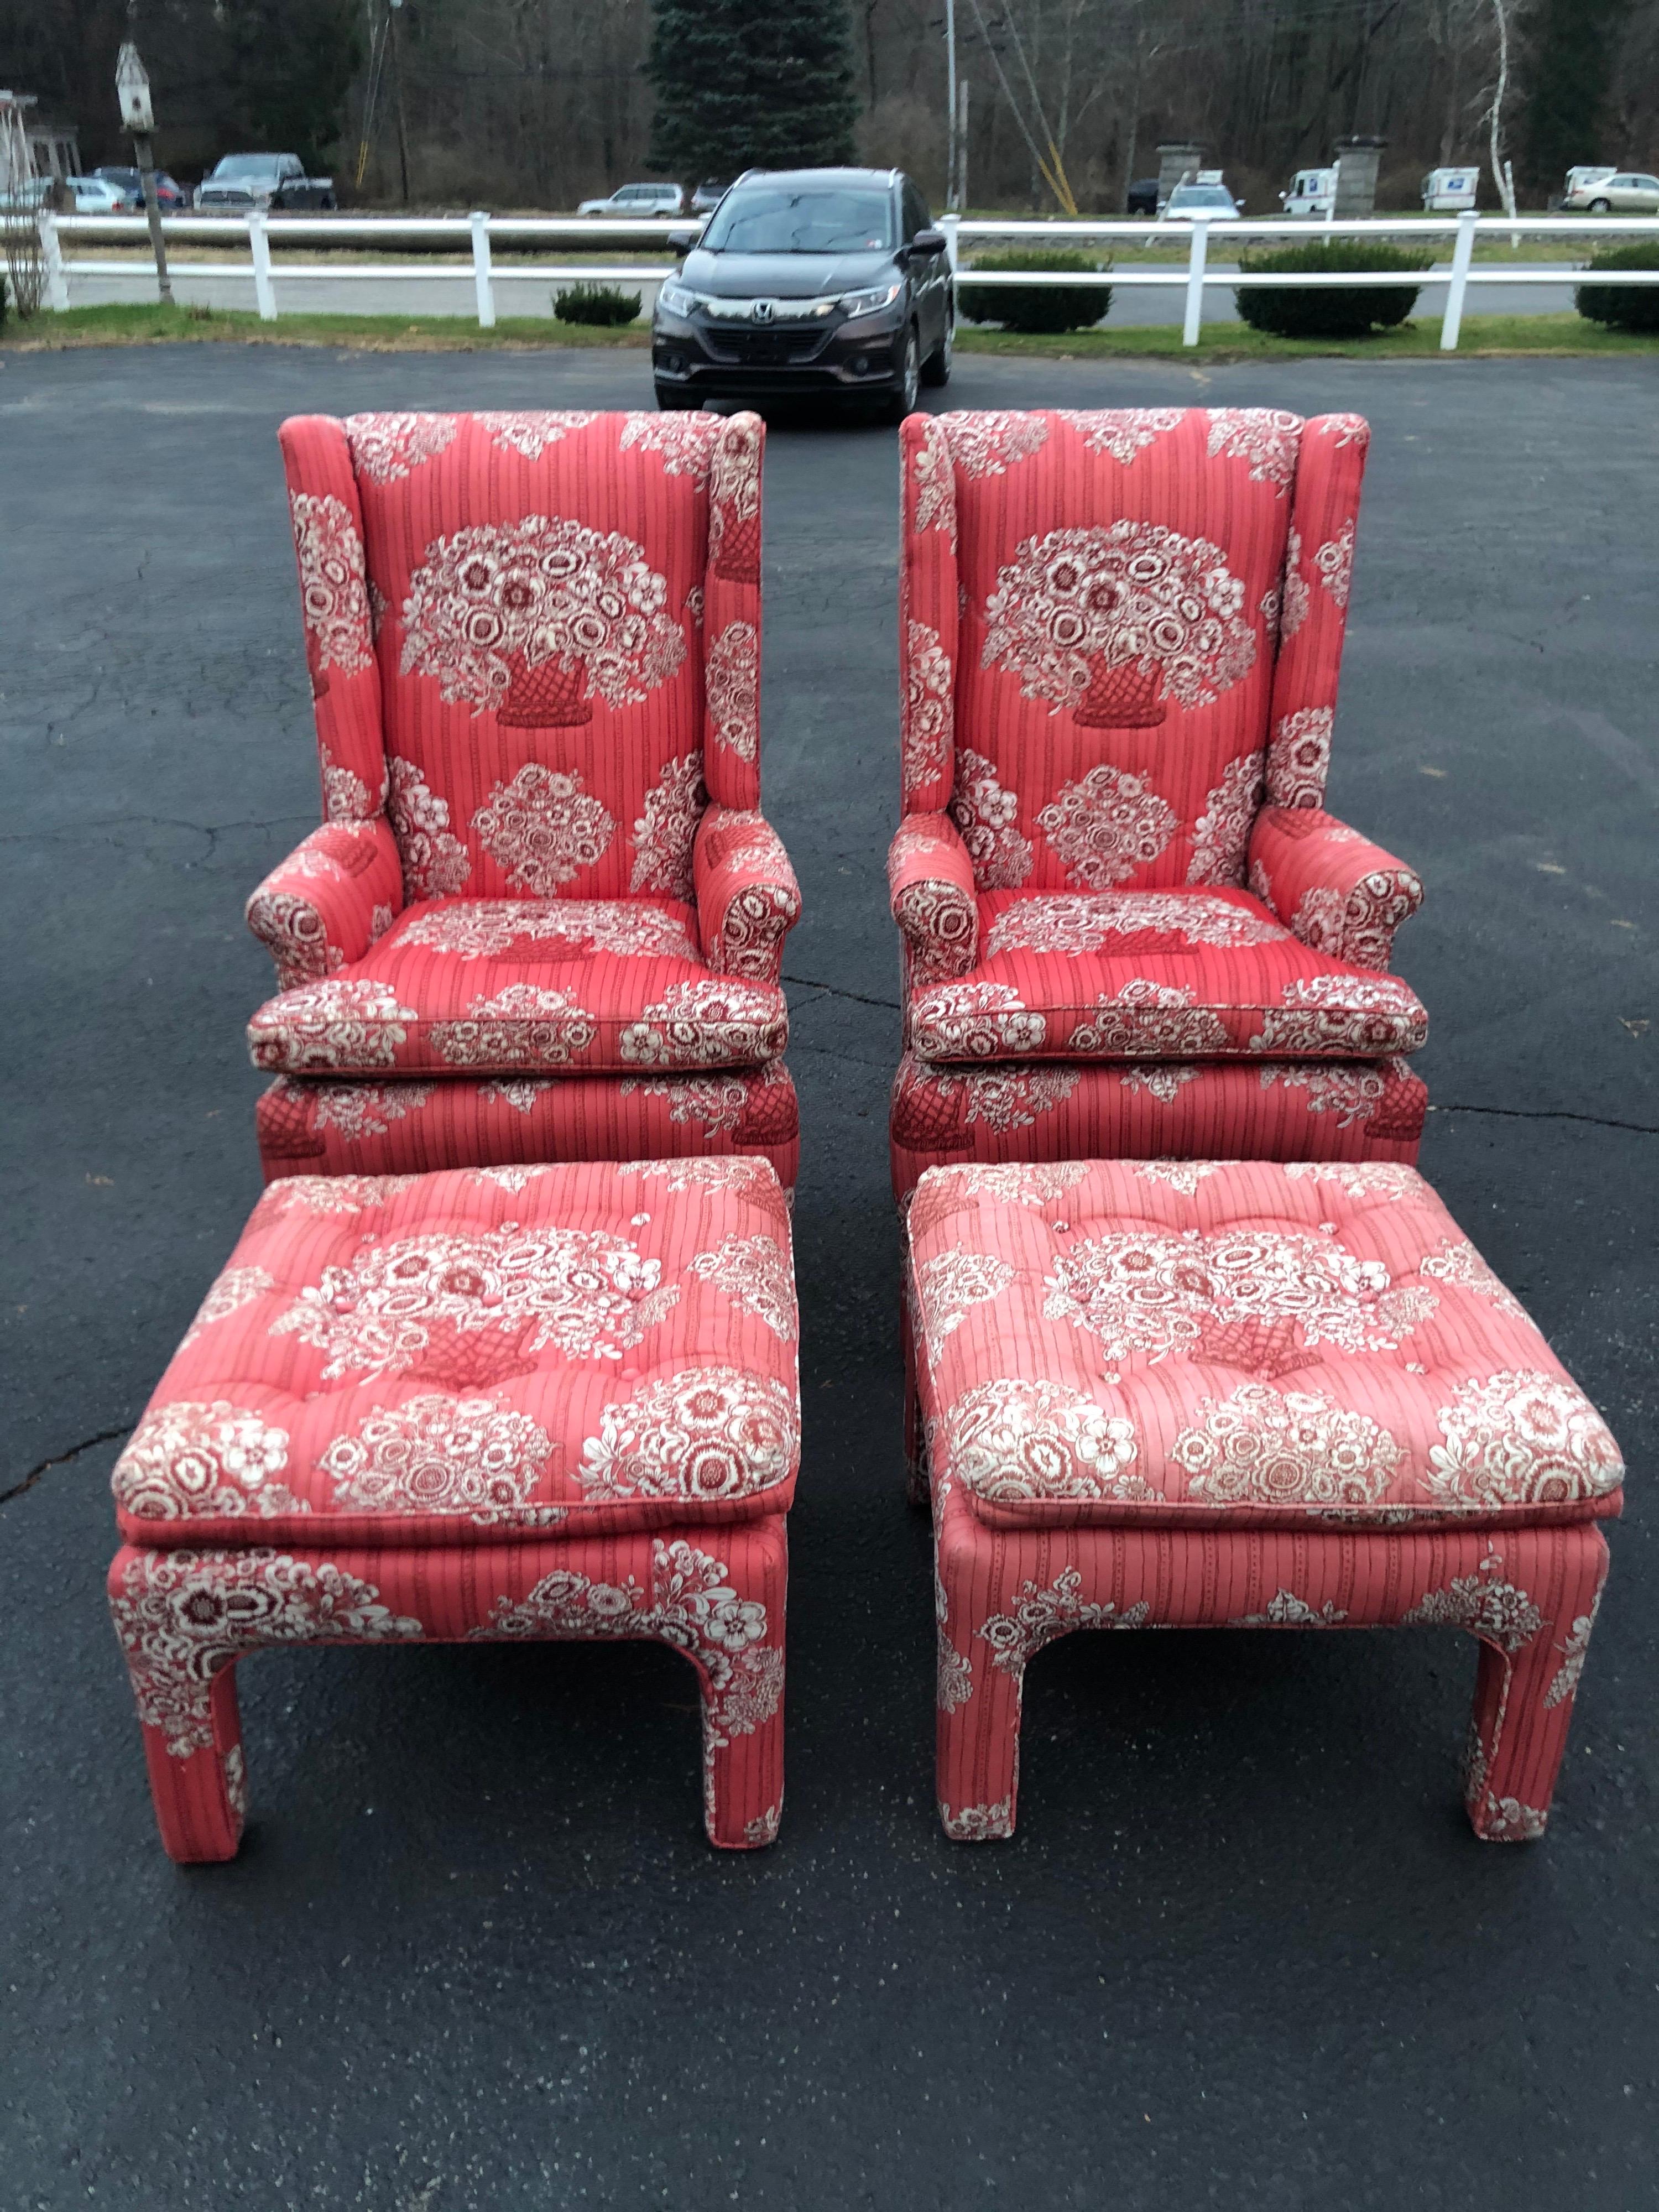 Pair of petite wing back chairs with matching ottomans. Whimsical fabric with quilted type design. The price is for the pair with ottomans.
Some wear to upholstery piping and fading to upholstery. Solid construction.
Measures: Chair height